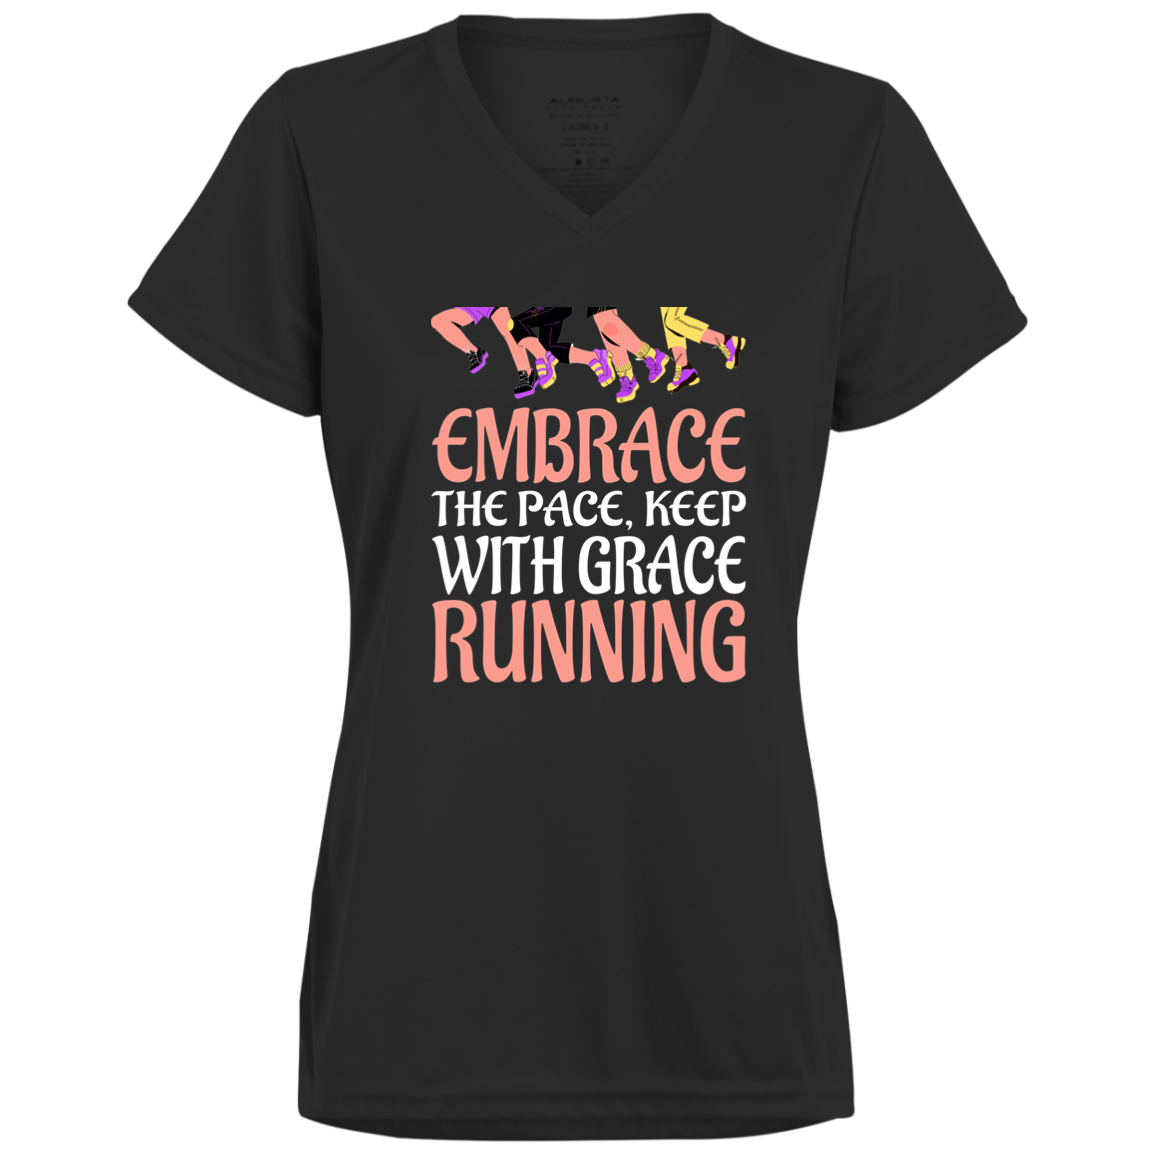 Women's Inspirational Top Embrace the pace, keep running with grace